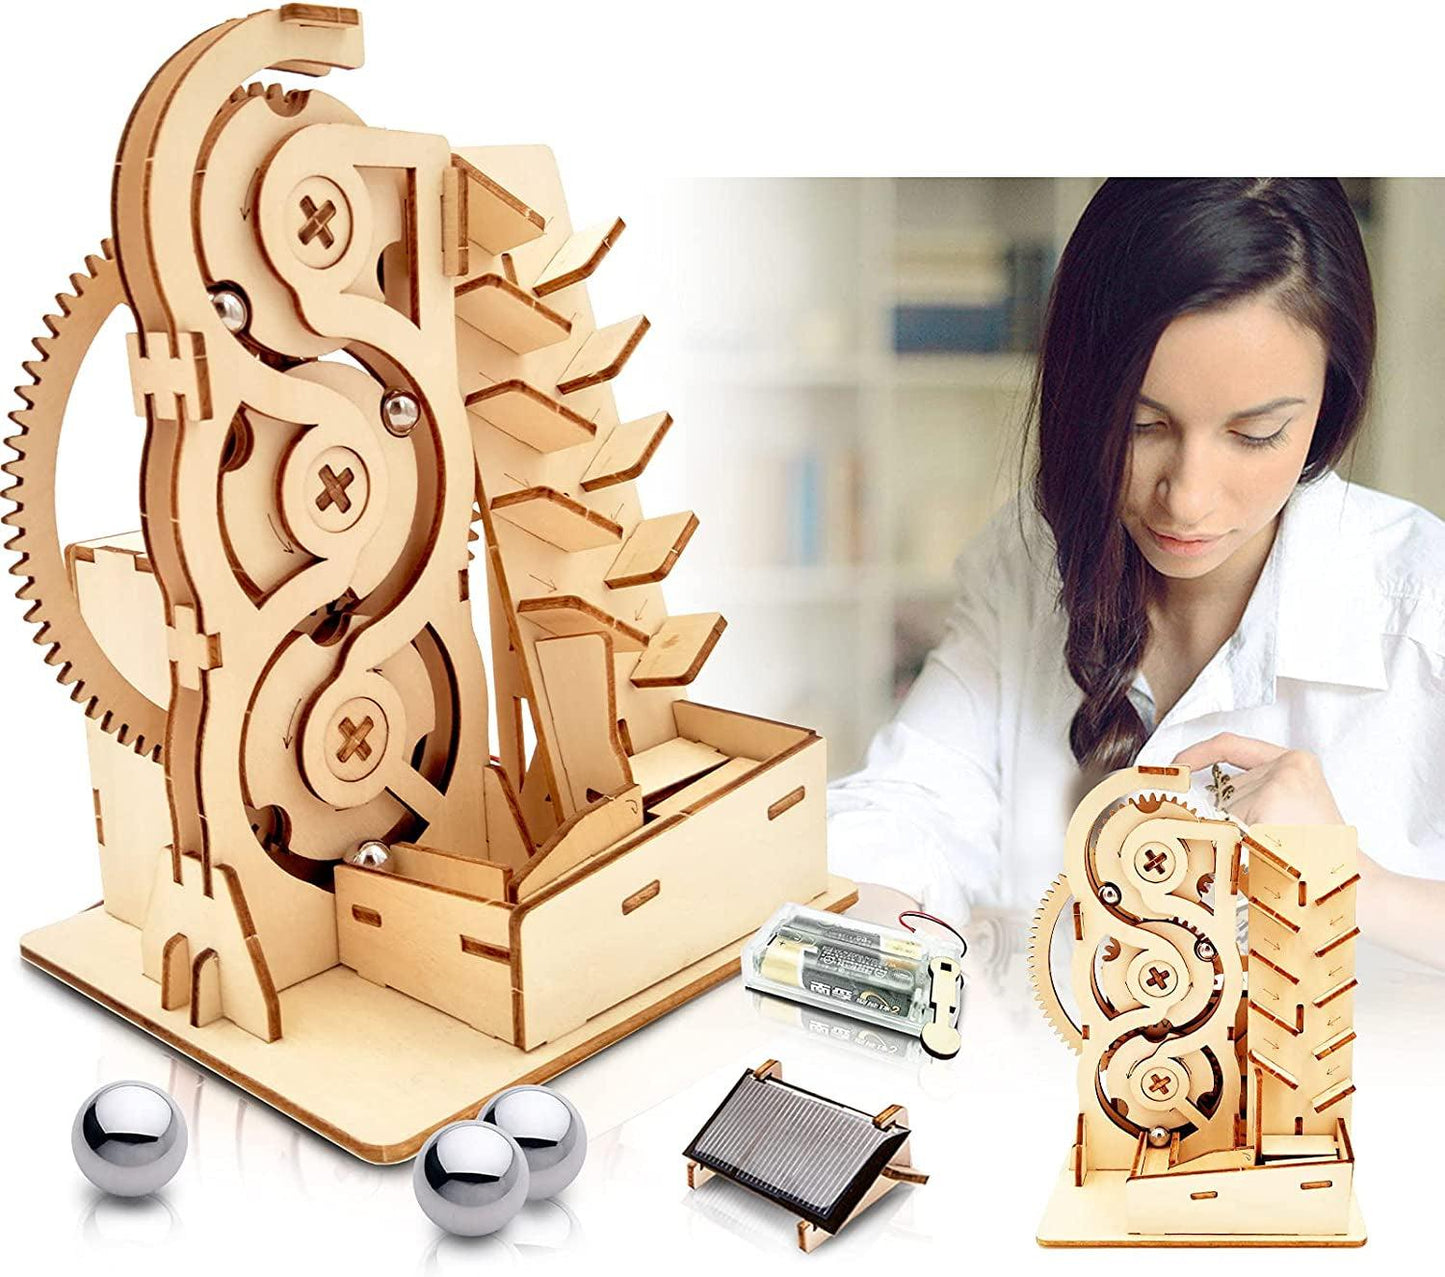 Solar 3D Wooden Puzzle Marble Run DIY Model Kit Craft Sets Educational Wood Mechanical Building Toys STEM Science Experiments - WoodArtSupply